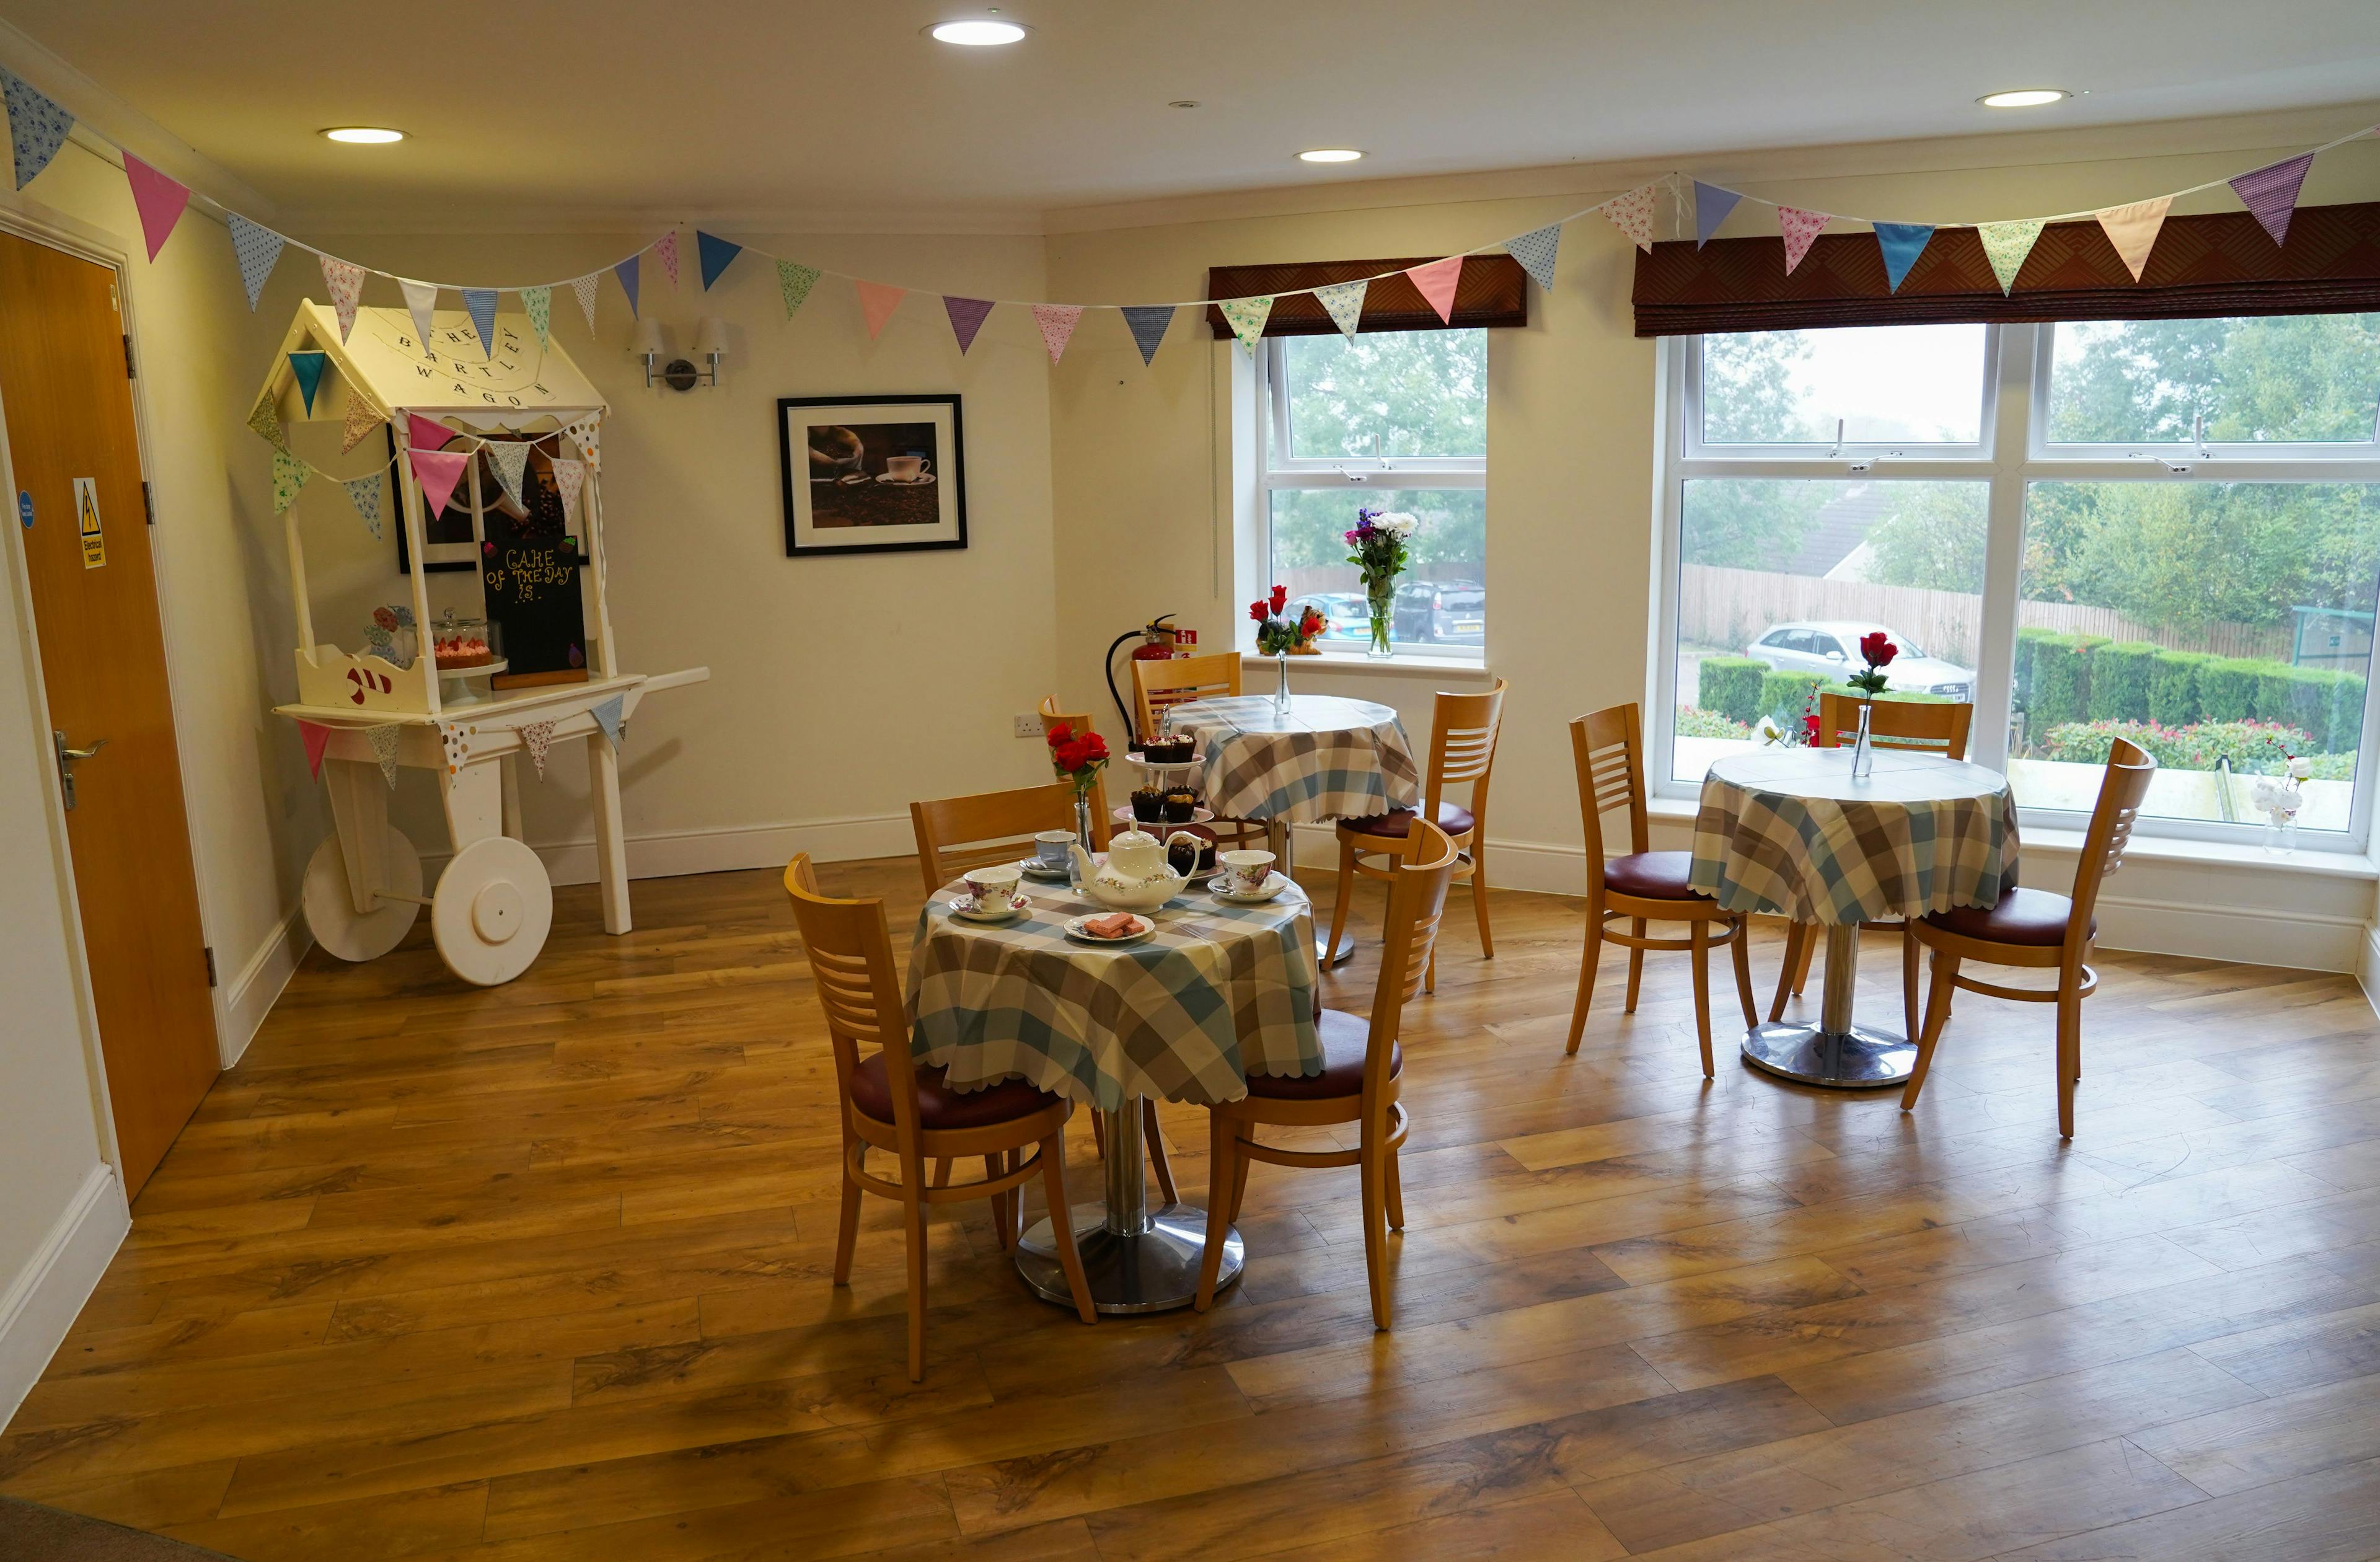 Dining Room at Bartley Green Care Home in Birmingham, West Midlands